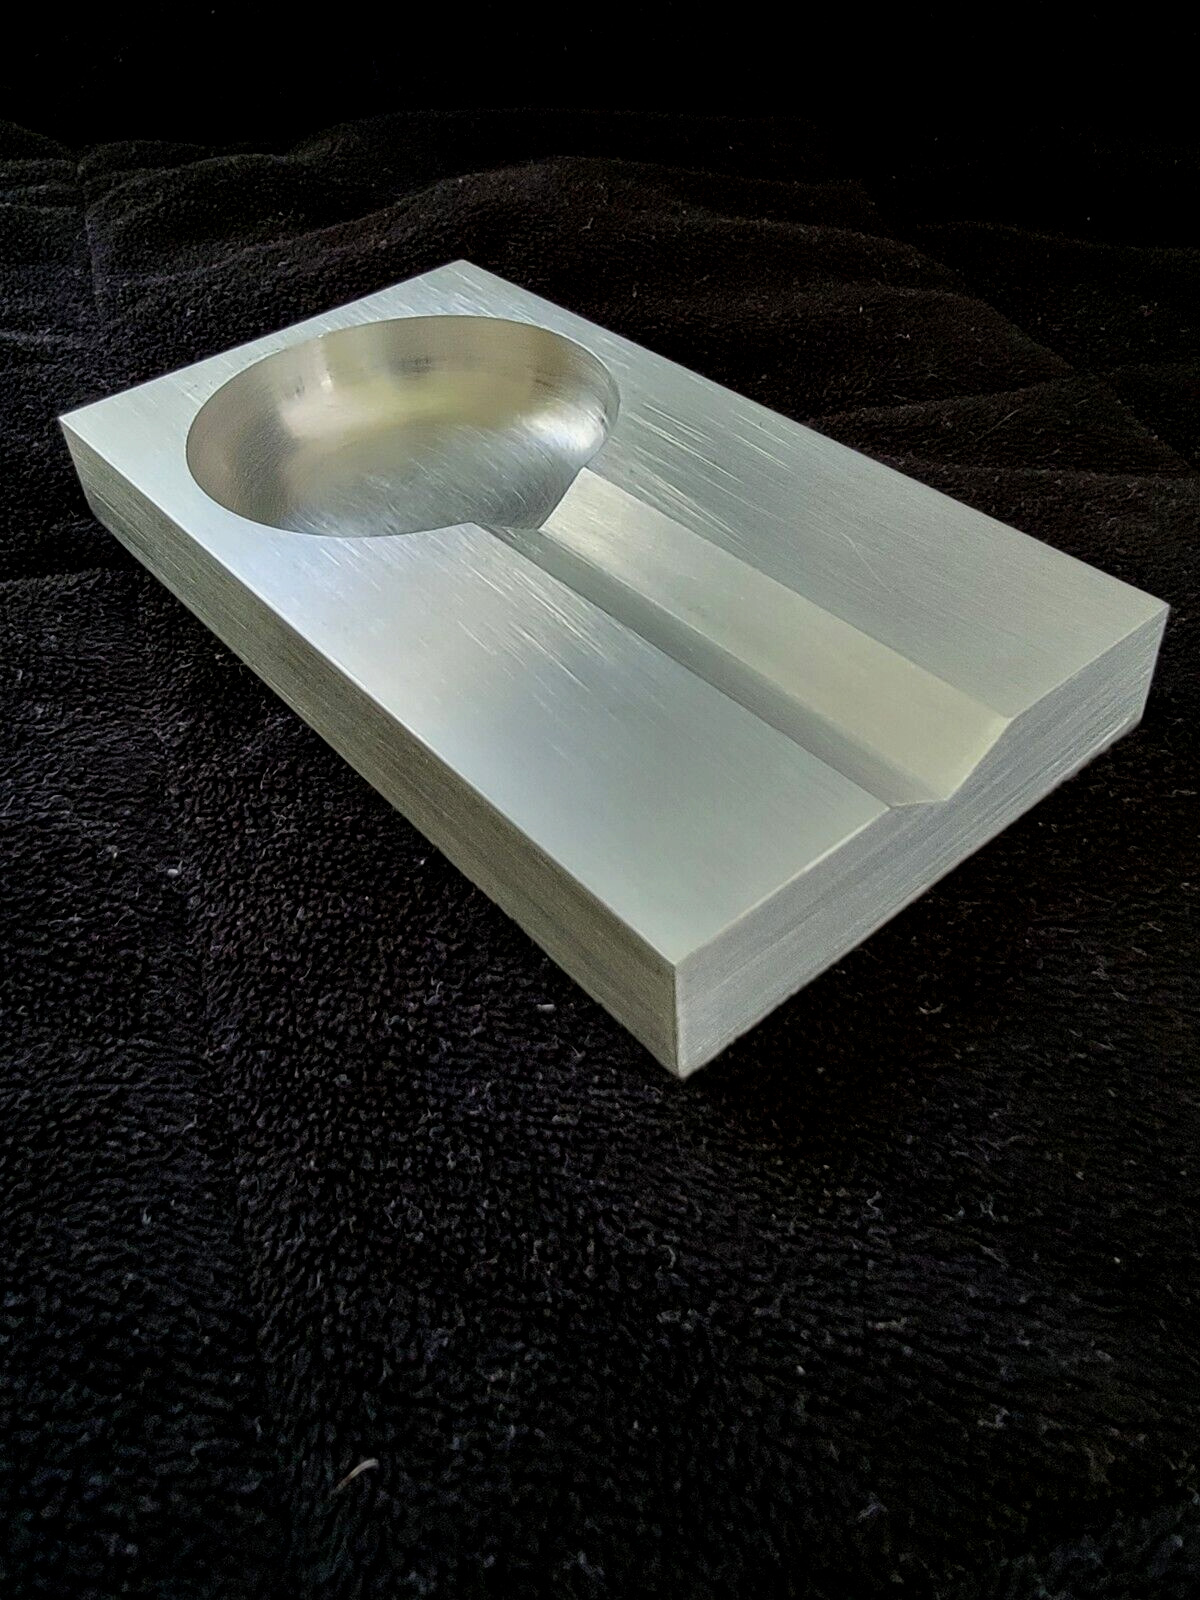 Modernist Style Vintage Cigar Ashtray Hand Made from Solid Aluminum Billet 